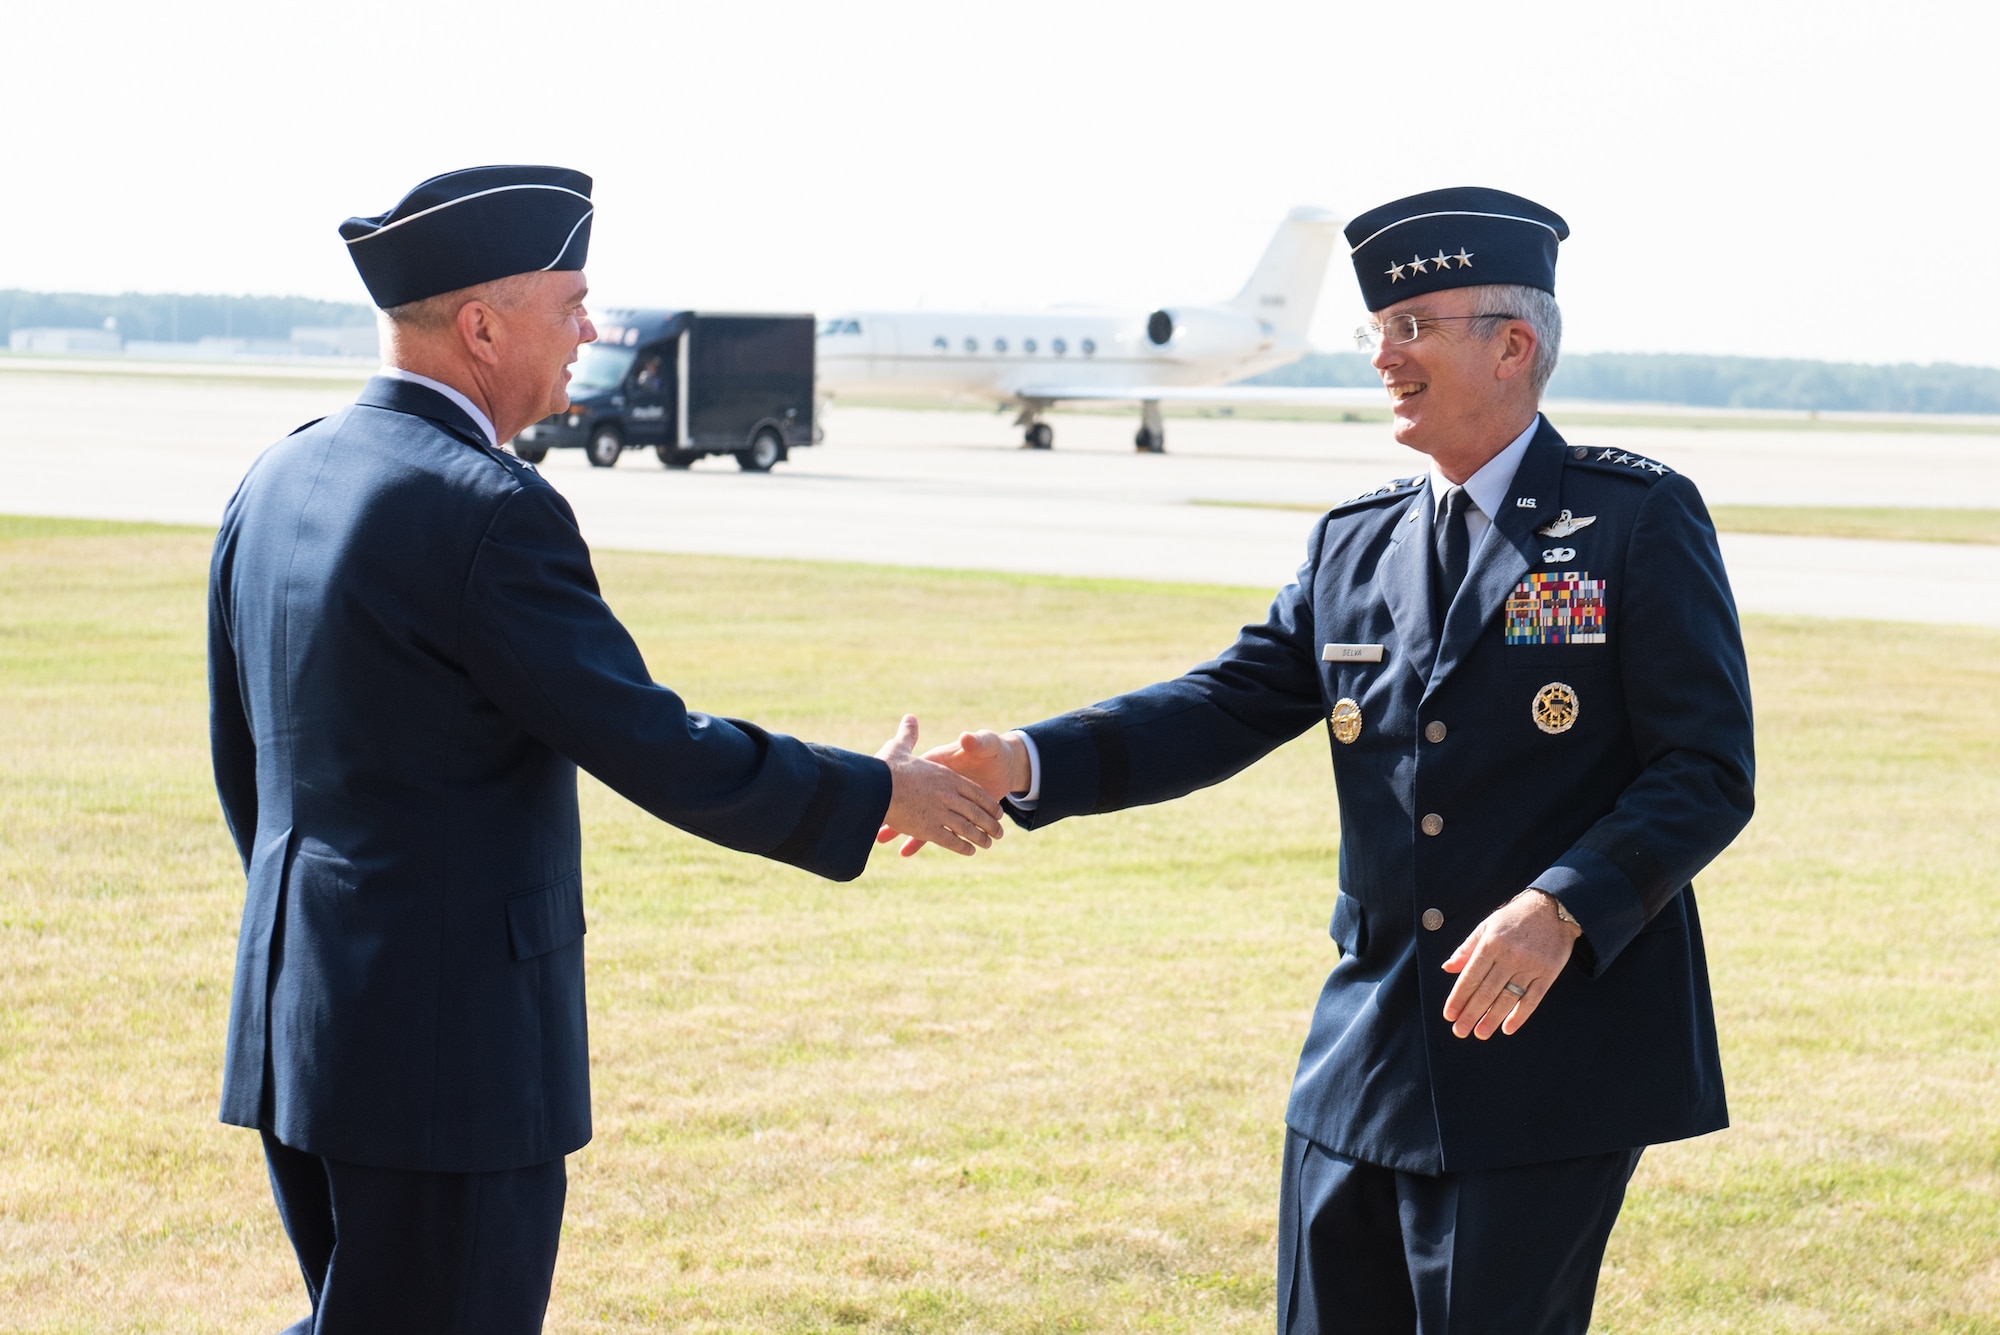 Air Force Maj. Gen. Ricky N. Rupp, Air Force District of Washington and 320th Air Expeditionary Wing Commander, greets Gen. Paul J. Selva, vice chairman of the Joint Chiefs of Staff, as he arrives ahead of his retirement ceremony hosted by Marine Corps Gen. Joe Dunford, chairman of the Joint Chiefs of Staff, at Hanger 3, Joint Base Andrews, Md., July 31, 2019. Gen. Selva retires after over 39 years of service. (DoD Photo by U.S. Army Sgt. James K. McCann)